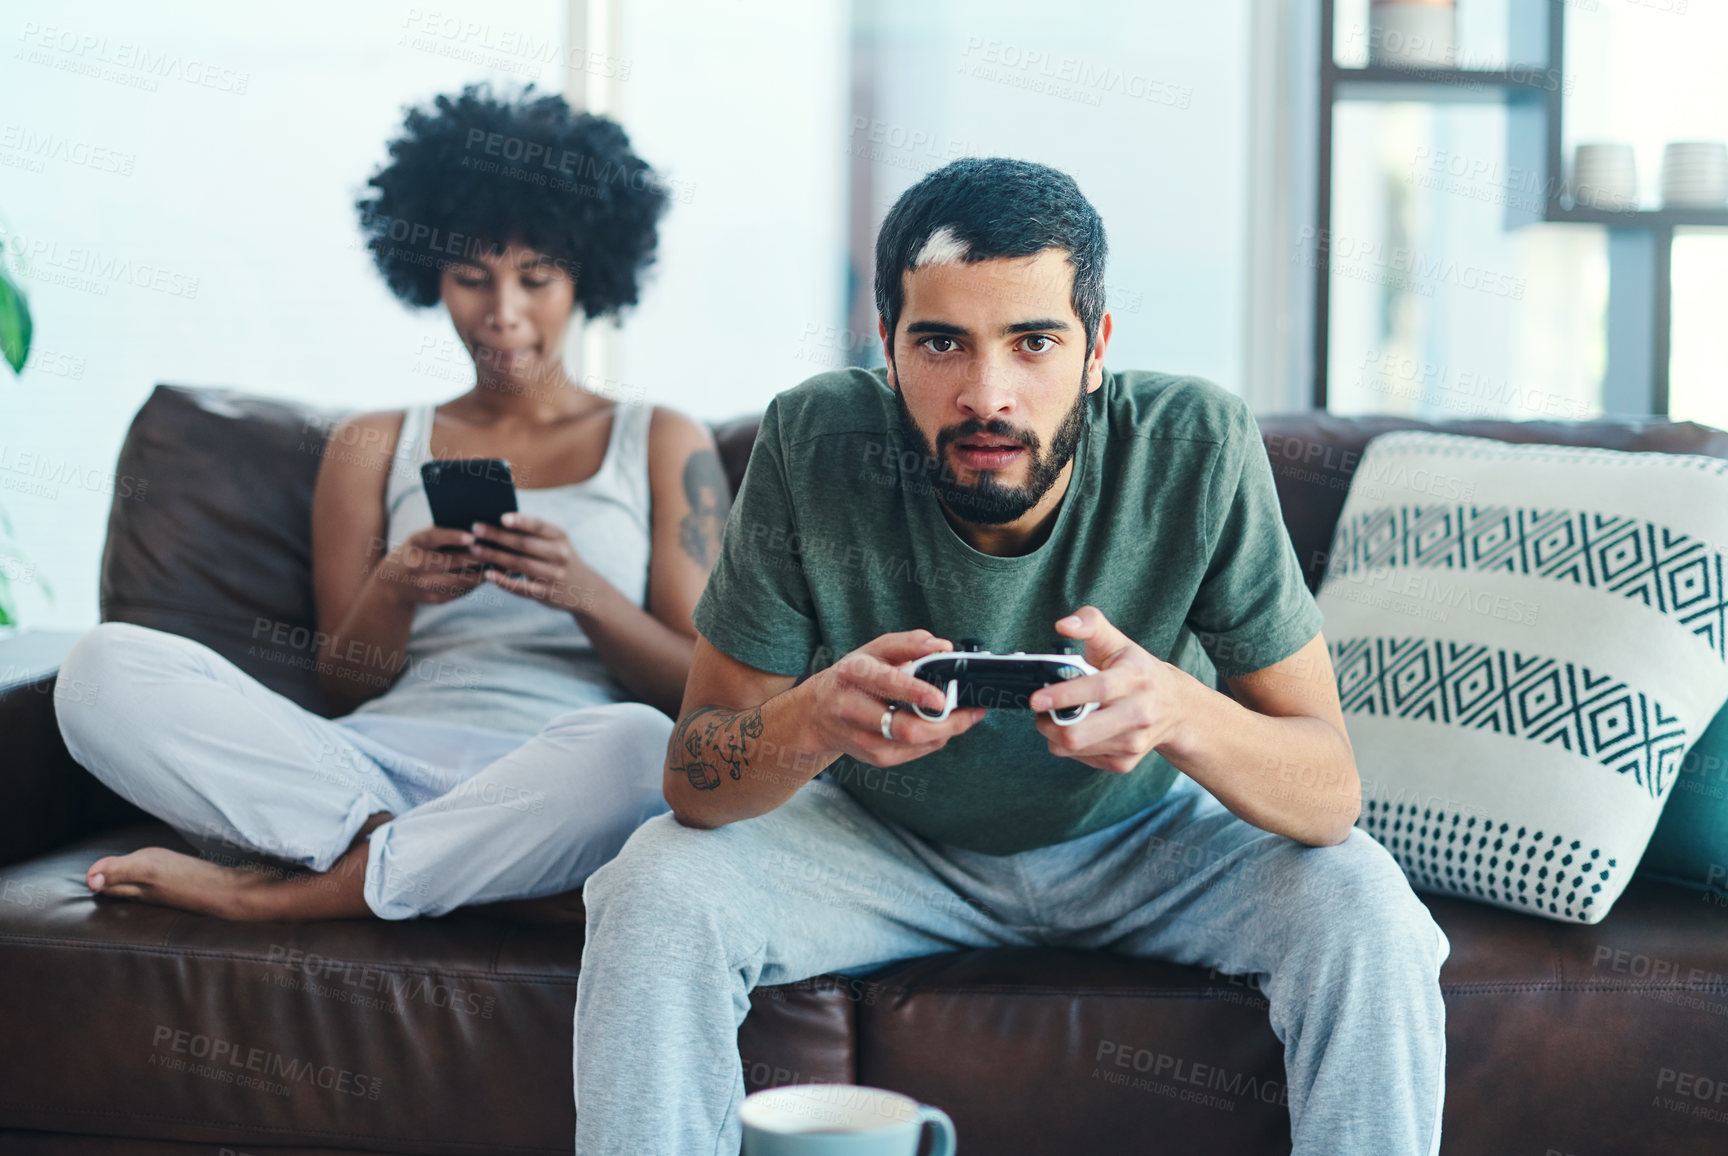 Buy stock photo Shot of a woman using her cellphone while her boyfriend plays video games